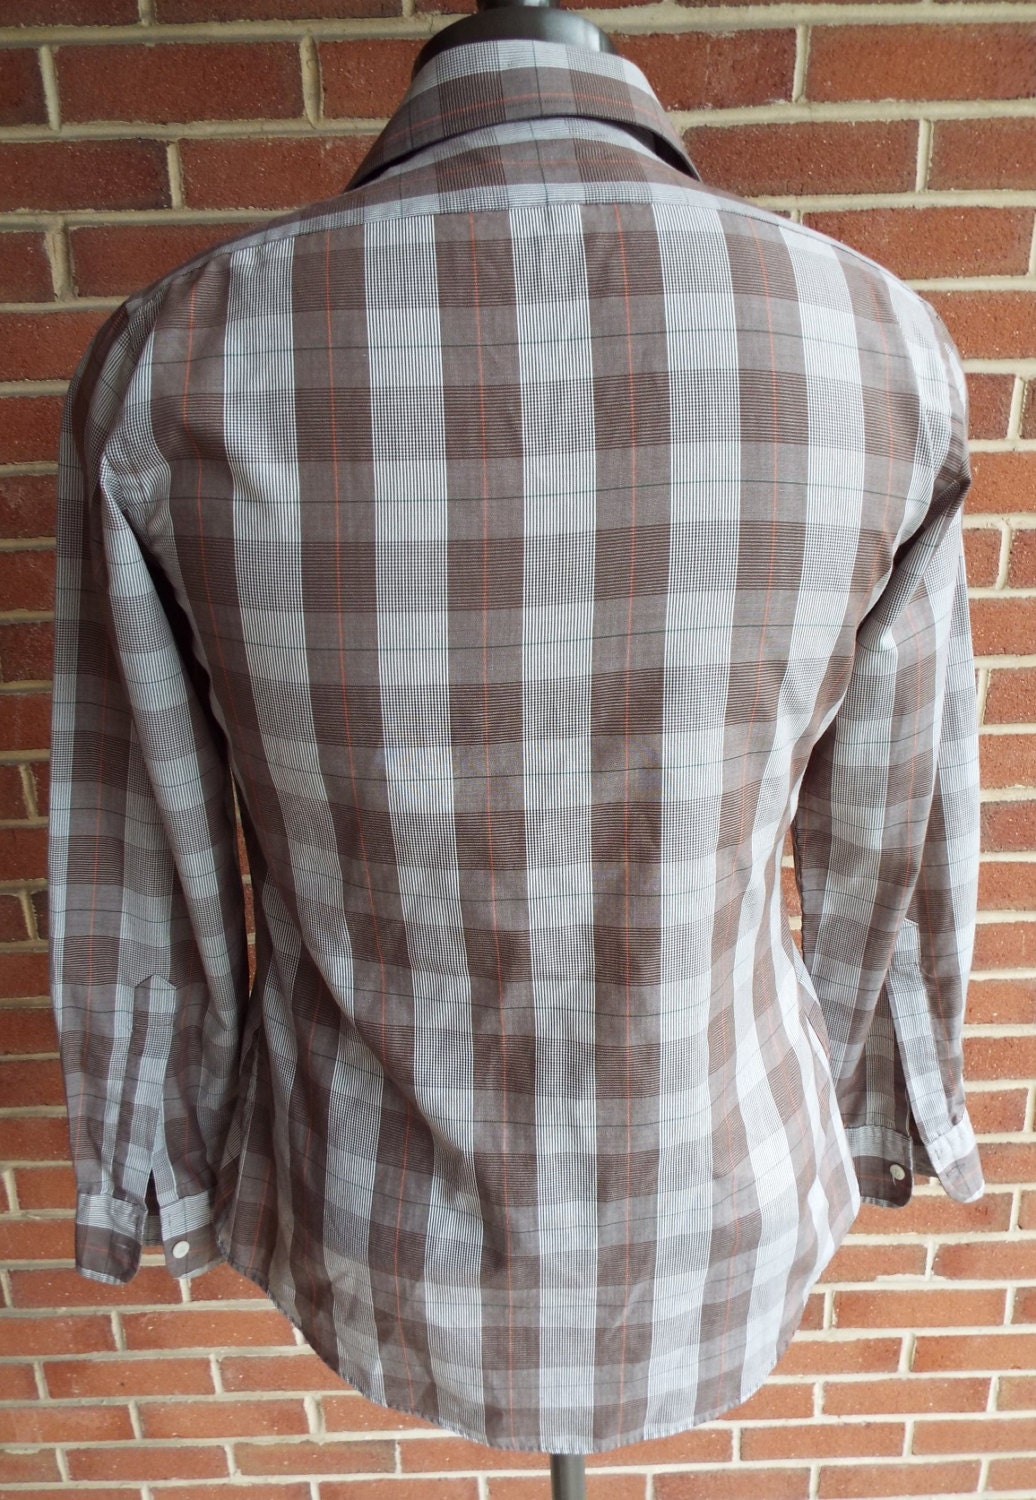 Vintage long sleeve button down shirt by Yves Saint Laurent